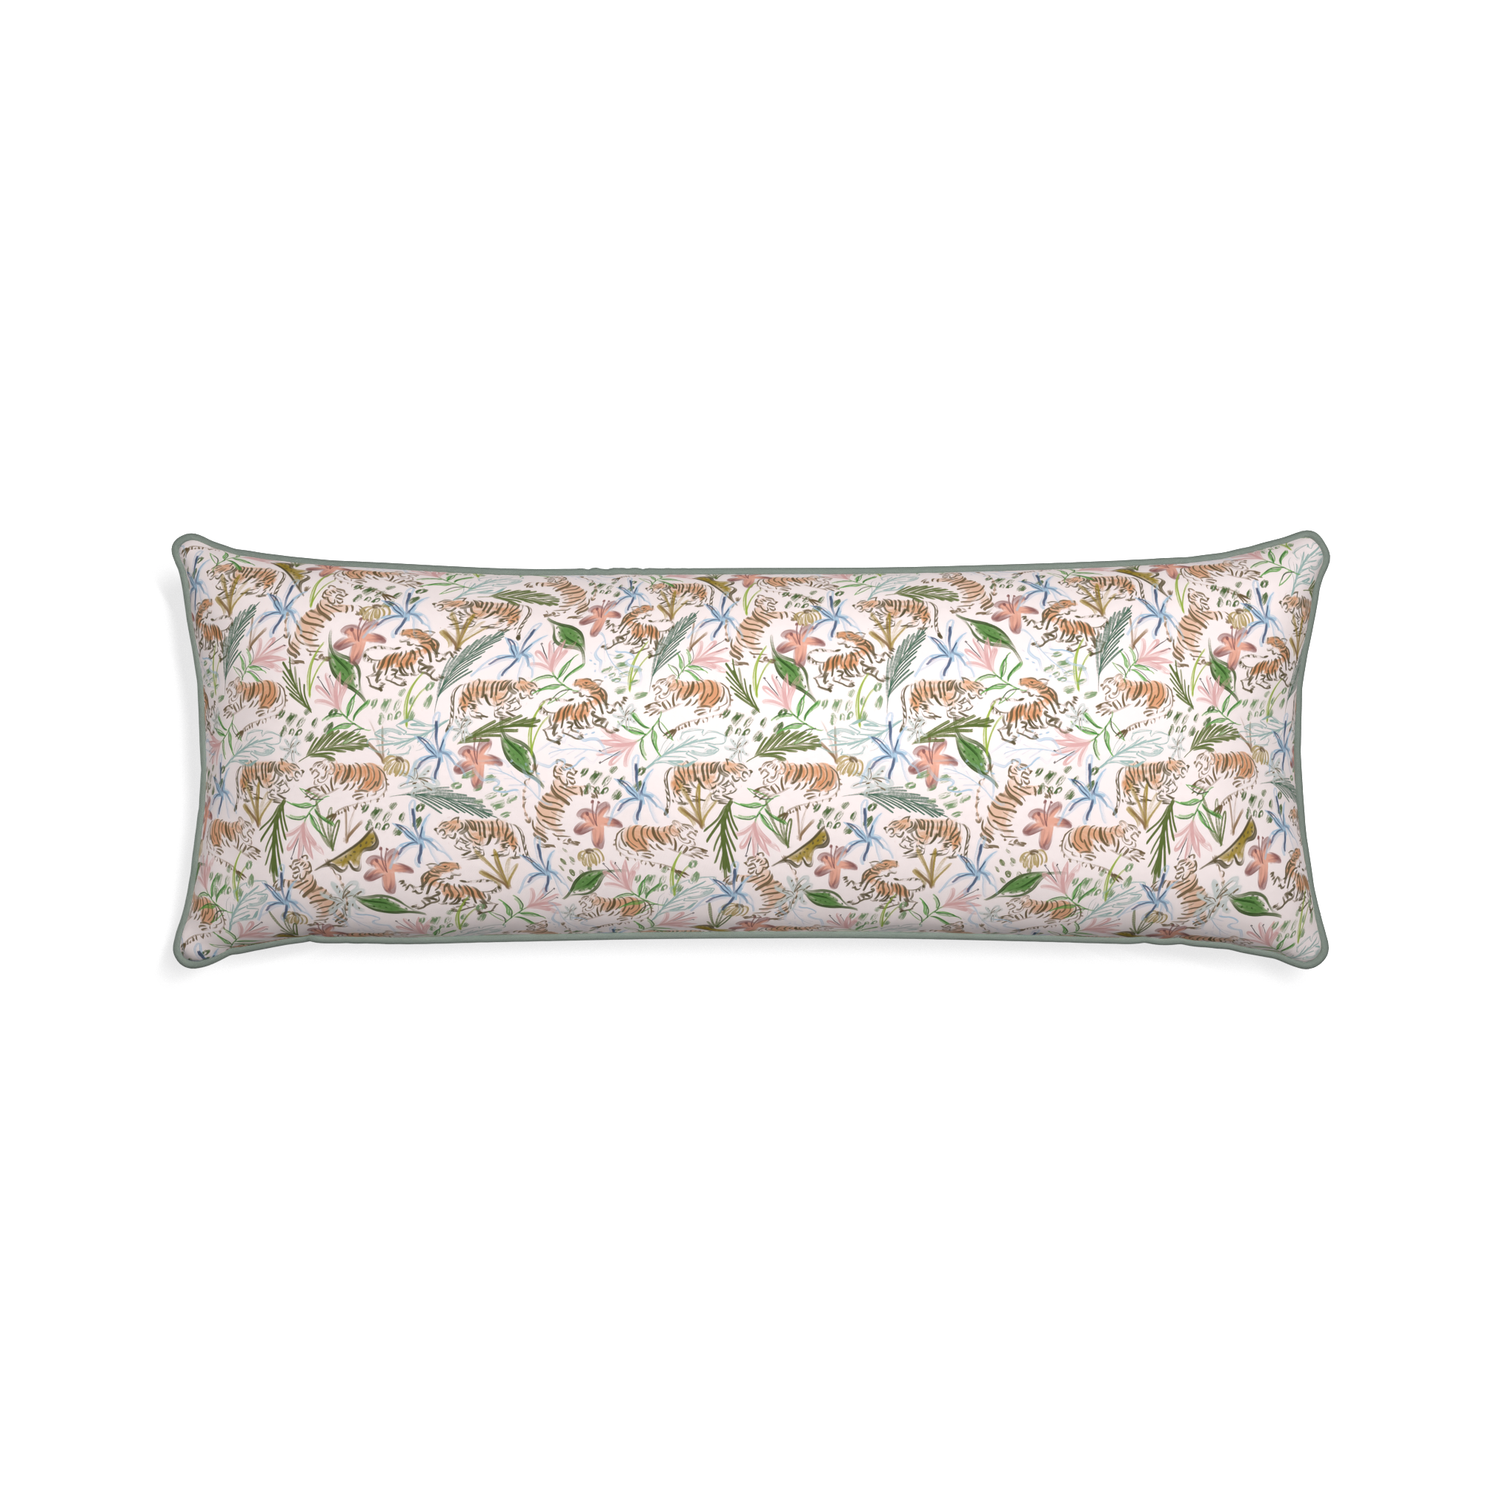 Xl-lumbar frida pink custom pink chinoiserie tigerpillow with sage piping on white background